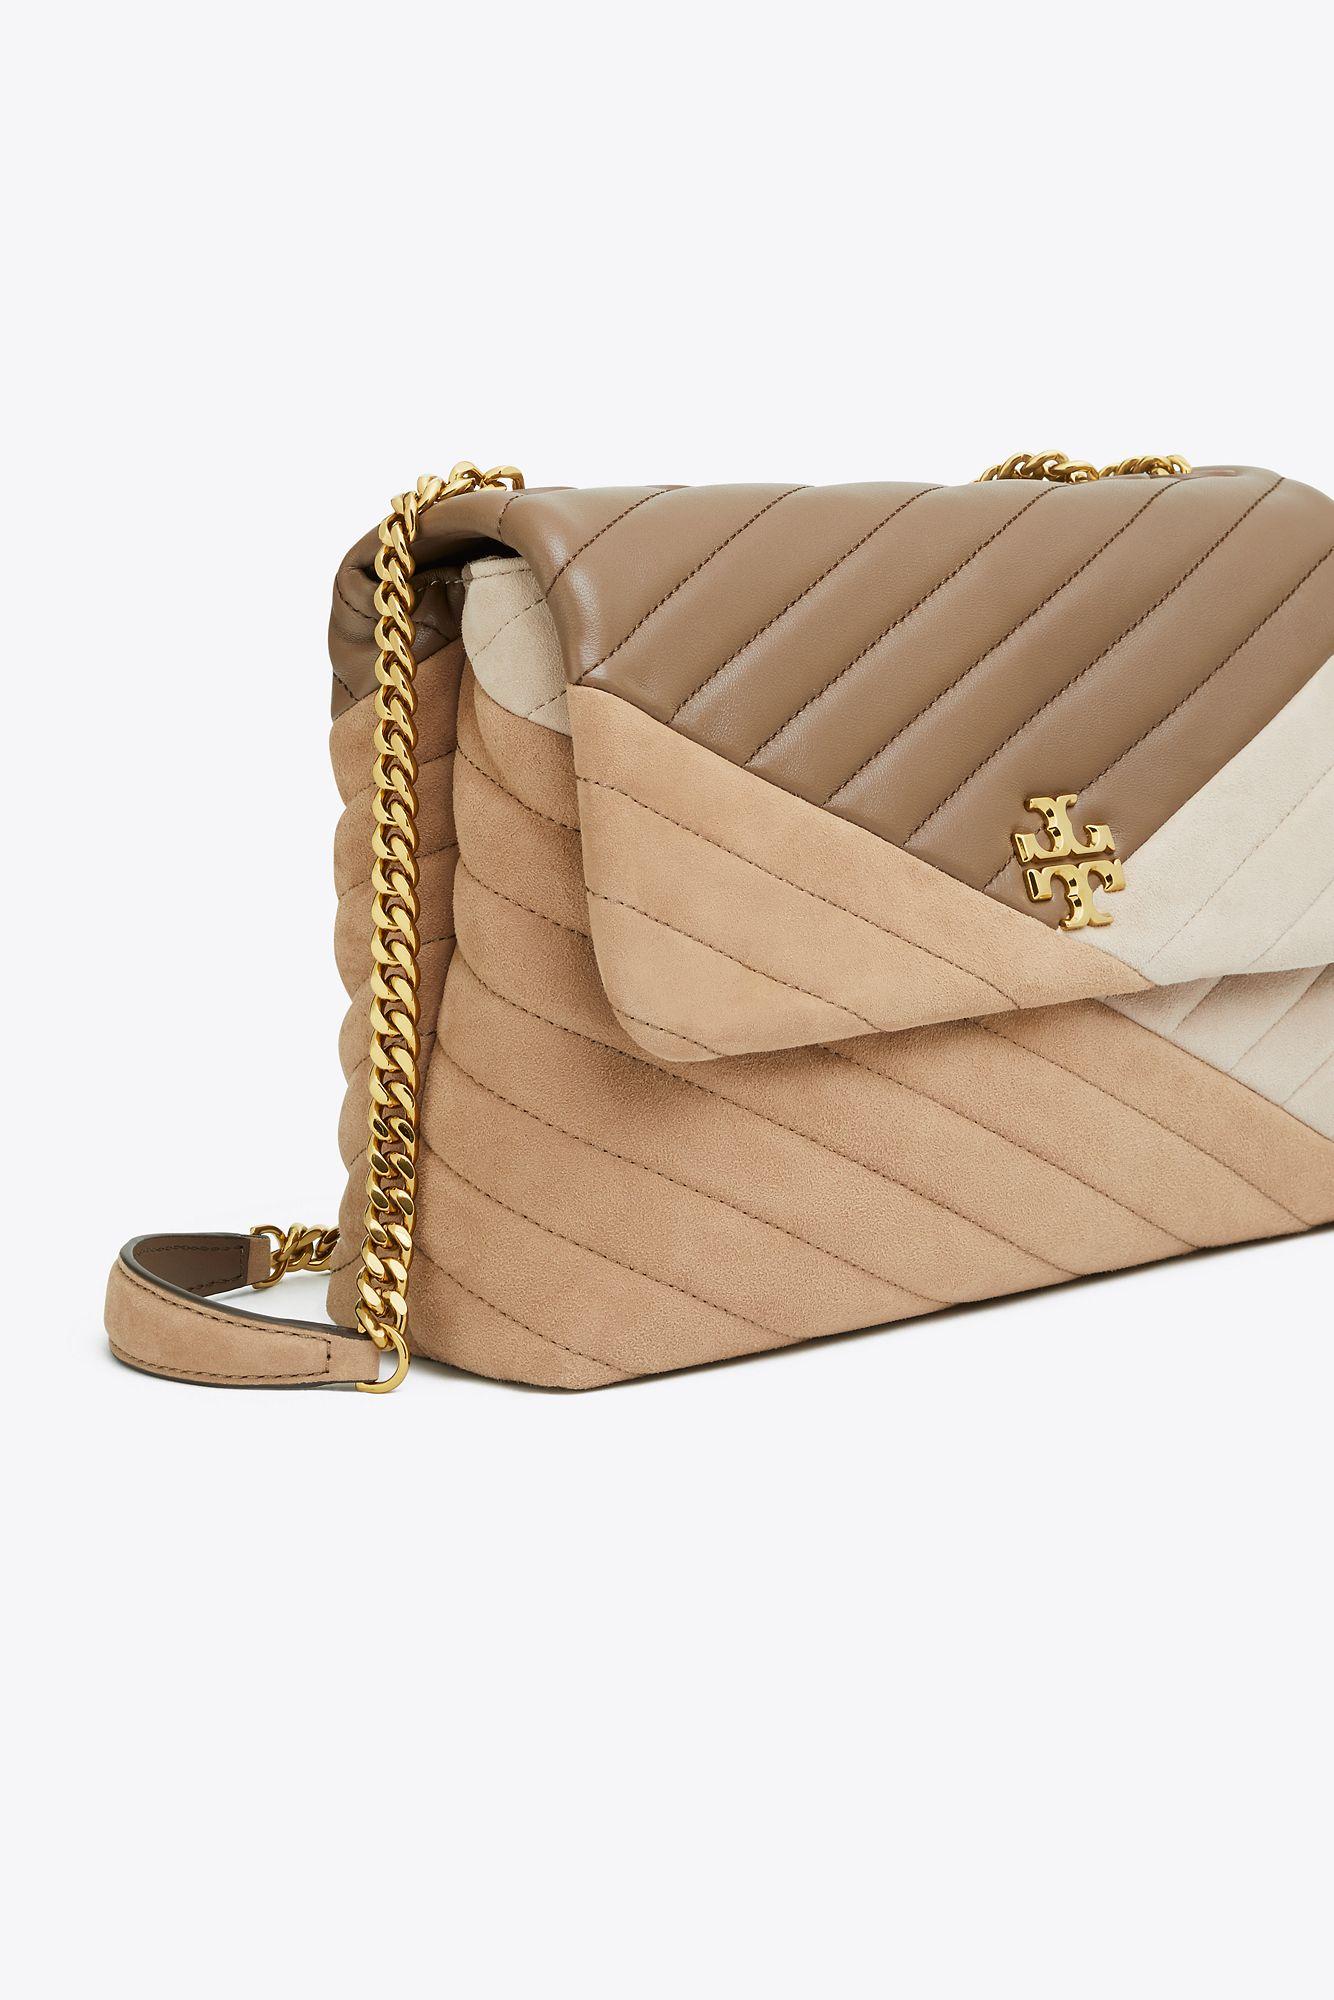 Tory Burch Kira Colorblock Quilted Leather Shoulder Bag - Lyst